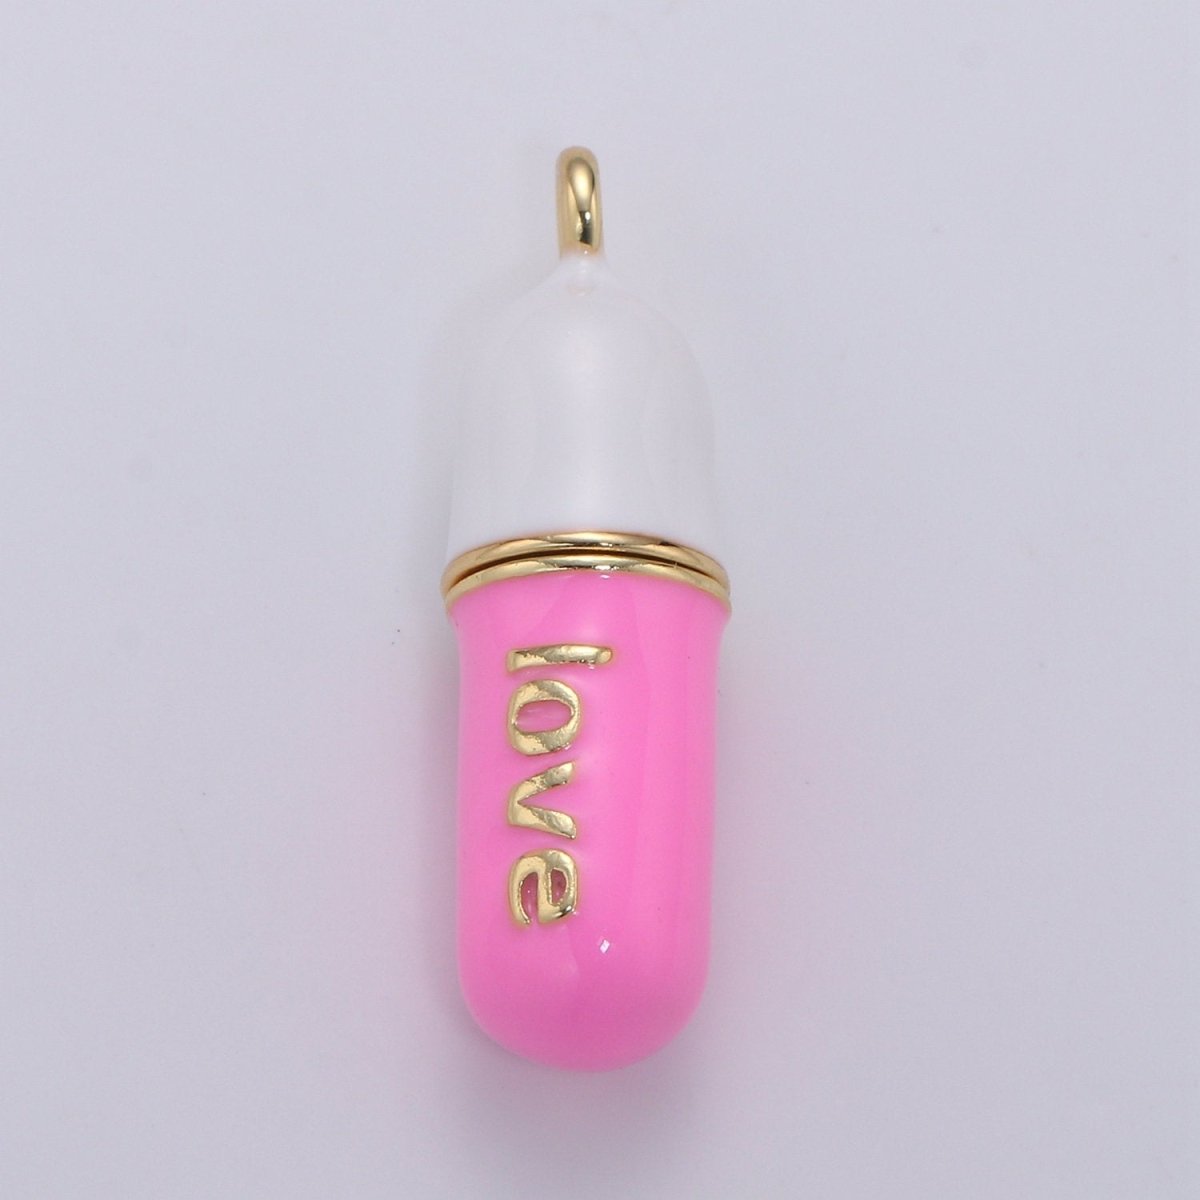 Dainty Gold Pill Bar Pendant Enamel Pink Love Chill Charm 24k Gold Filed Pendant for Bracelet Necklace Earring Component Supply 29x8mm, D-313, D-314 - DLUXCA